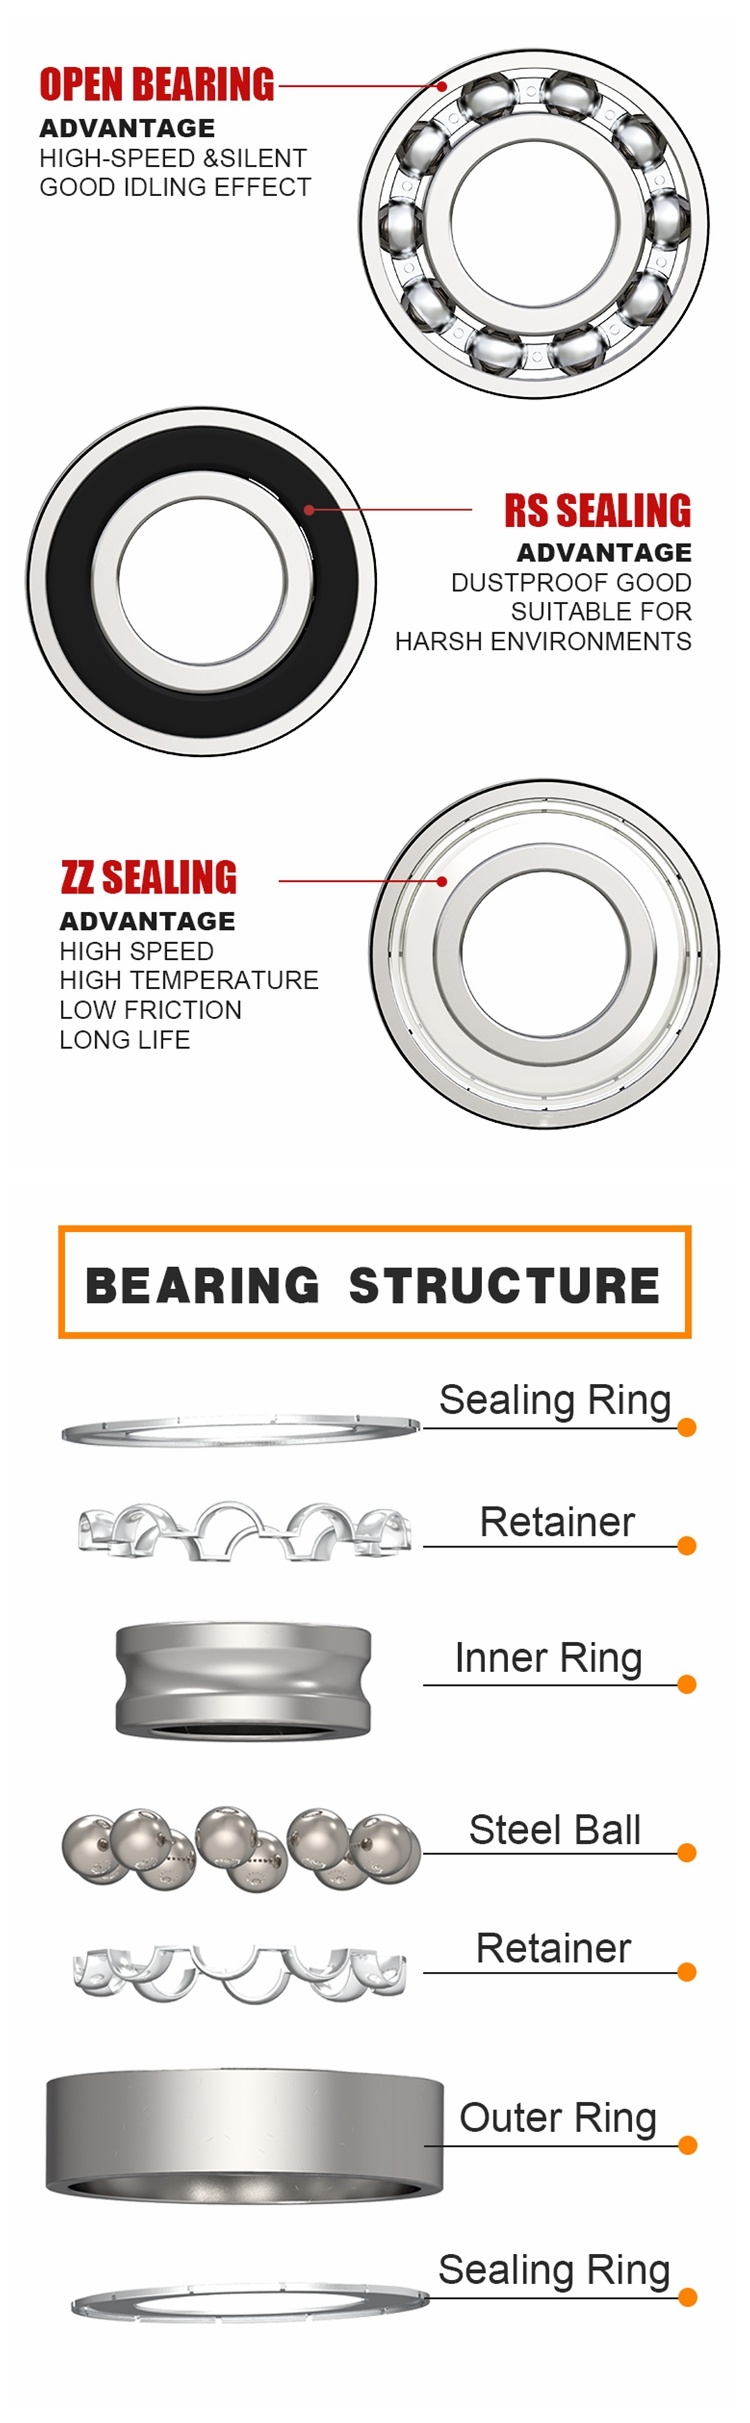 P0 Level Bicycle Bearing Z2 F6000zze Flange Deep Groove Ball Bearing